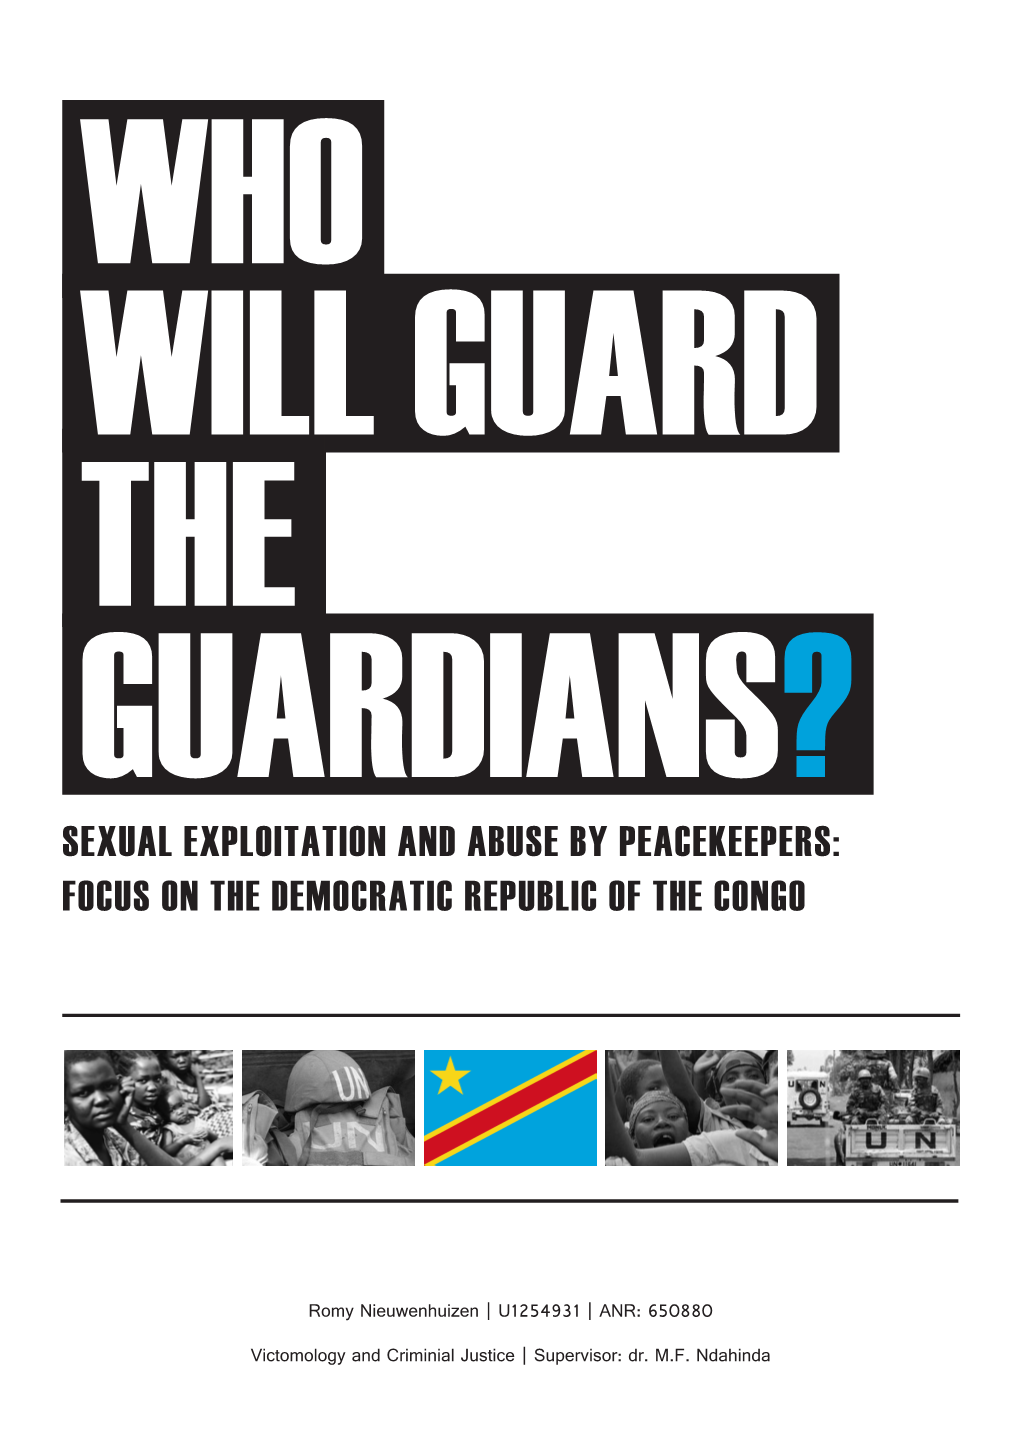 Sexual Exploitation and Abuse by Peacekeepers: Focus on the Democratic Republic of the Congo